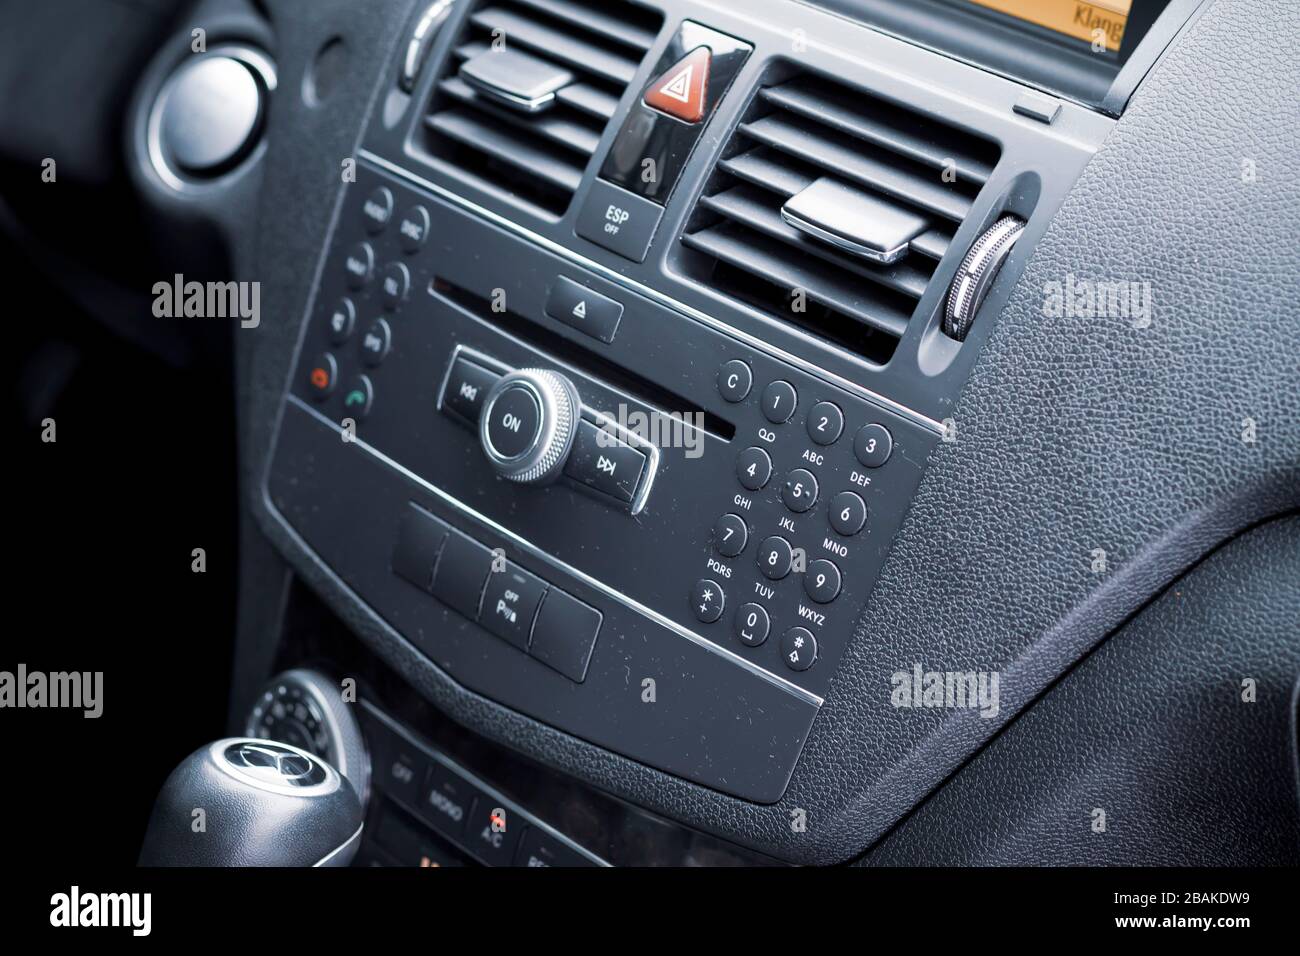 Dark car interior - steering wheel, shift lever and dashboard. Car modern facelift Mercedes E250 model inside view. Front view. Stock Photo